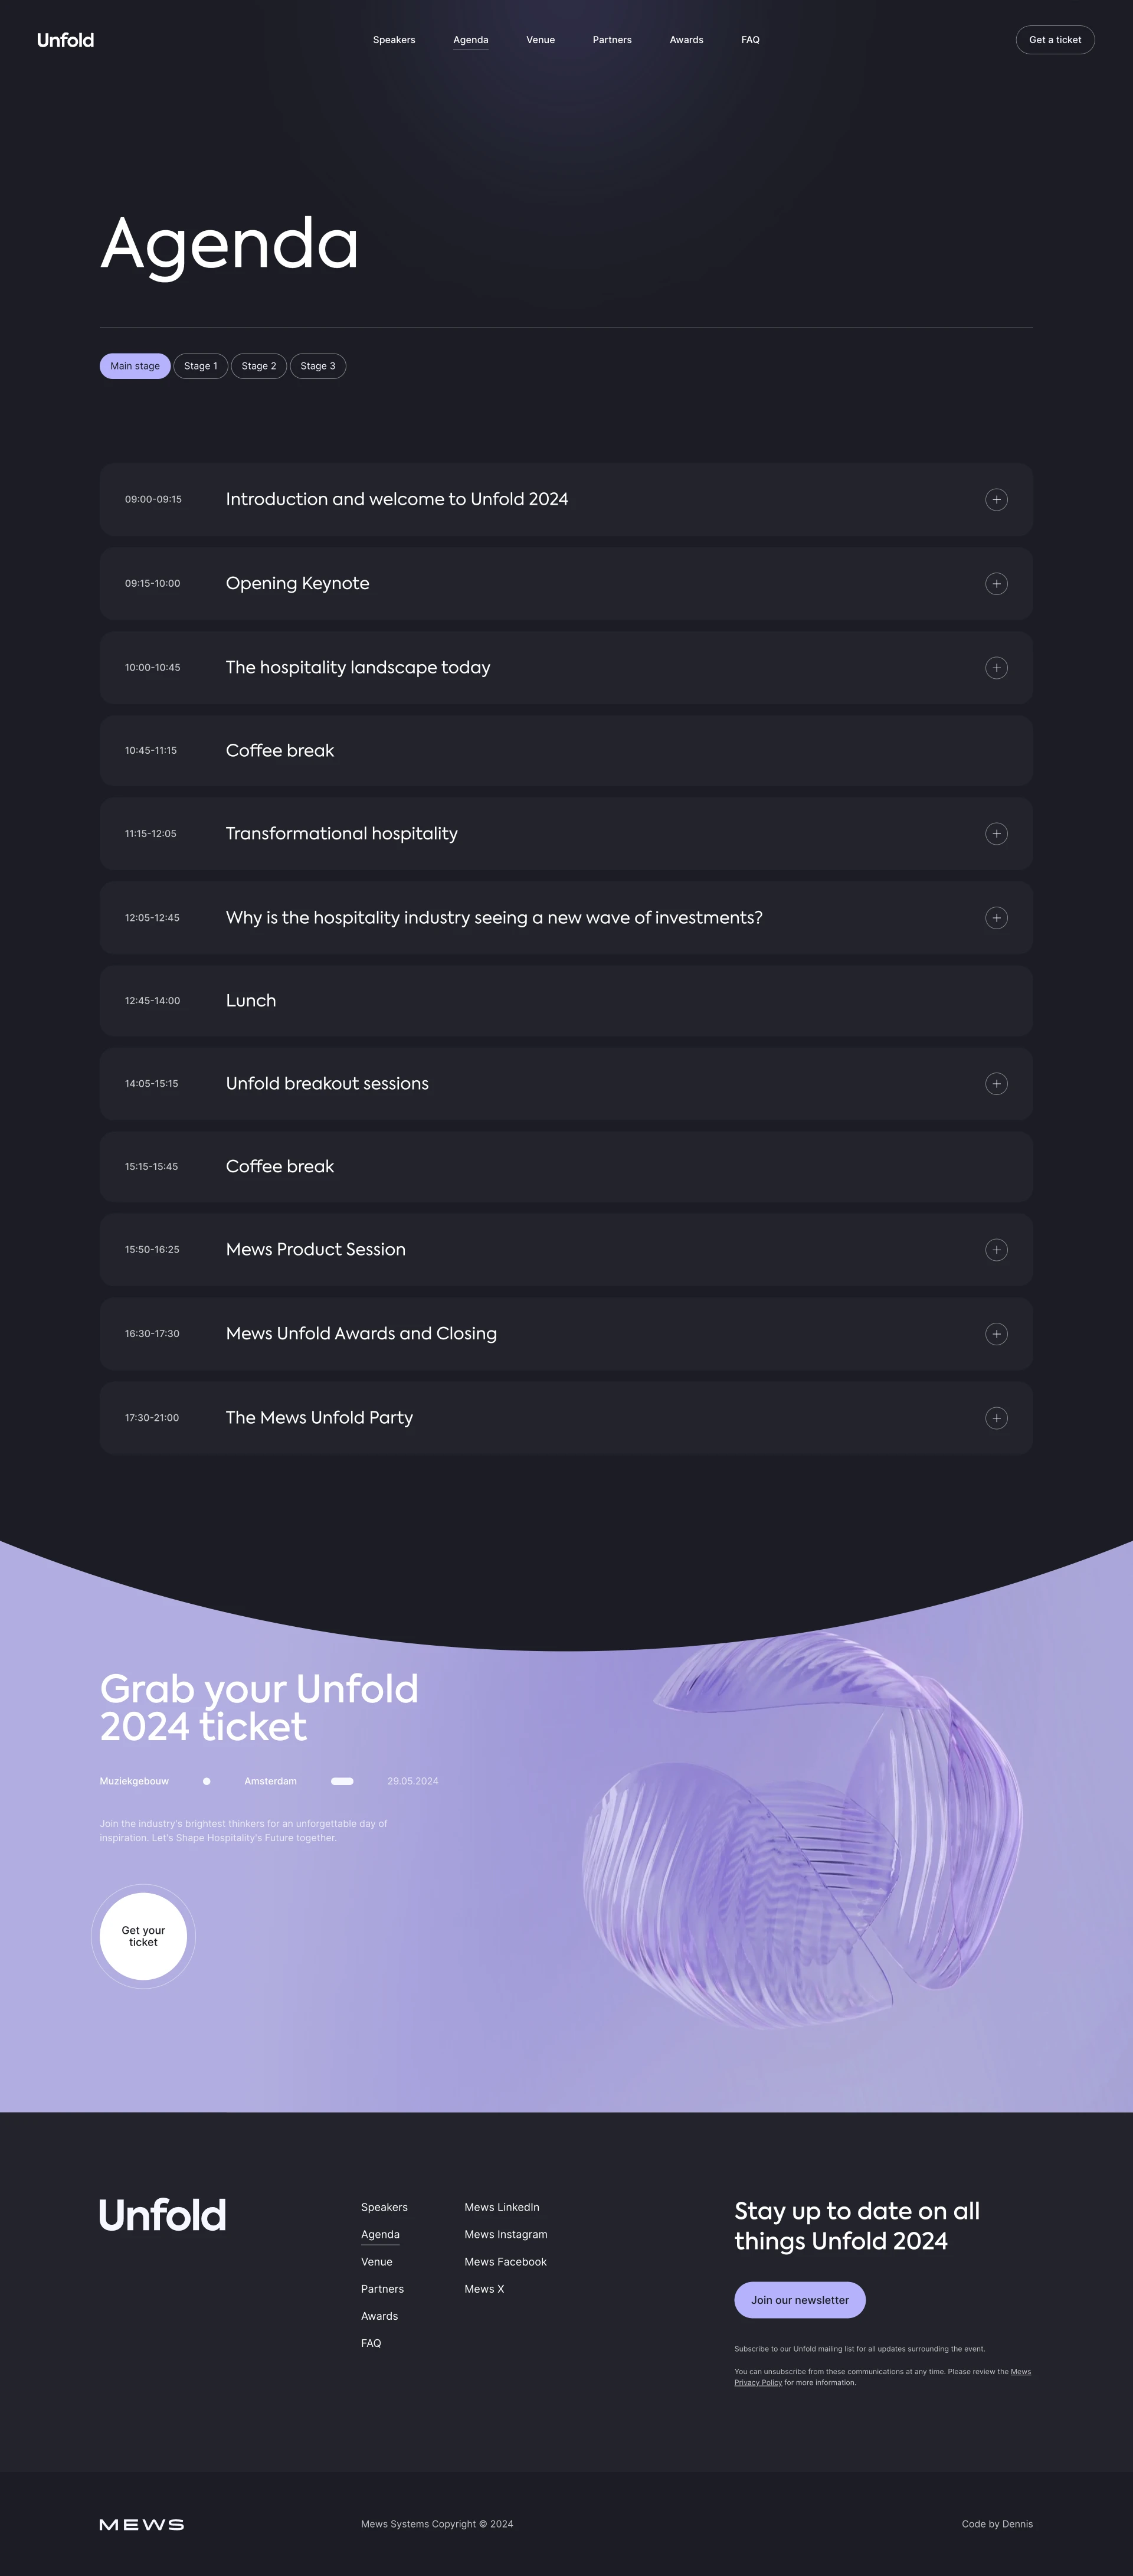 Unfold Amsterdam 2024 Landing Page Example: Unfold agenda will focus on innovation, investment trends within hospitality, automation and the power of guest data and the effects of distributed living.